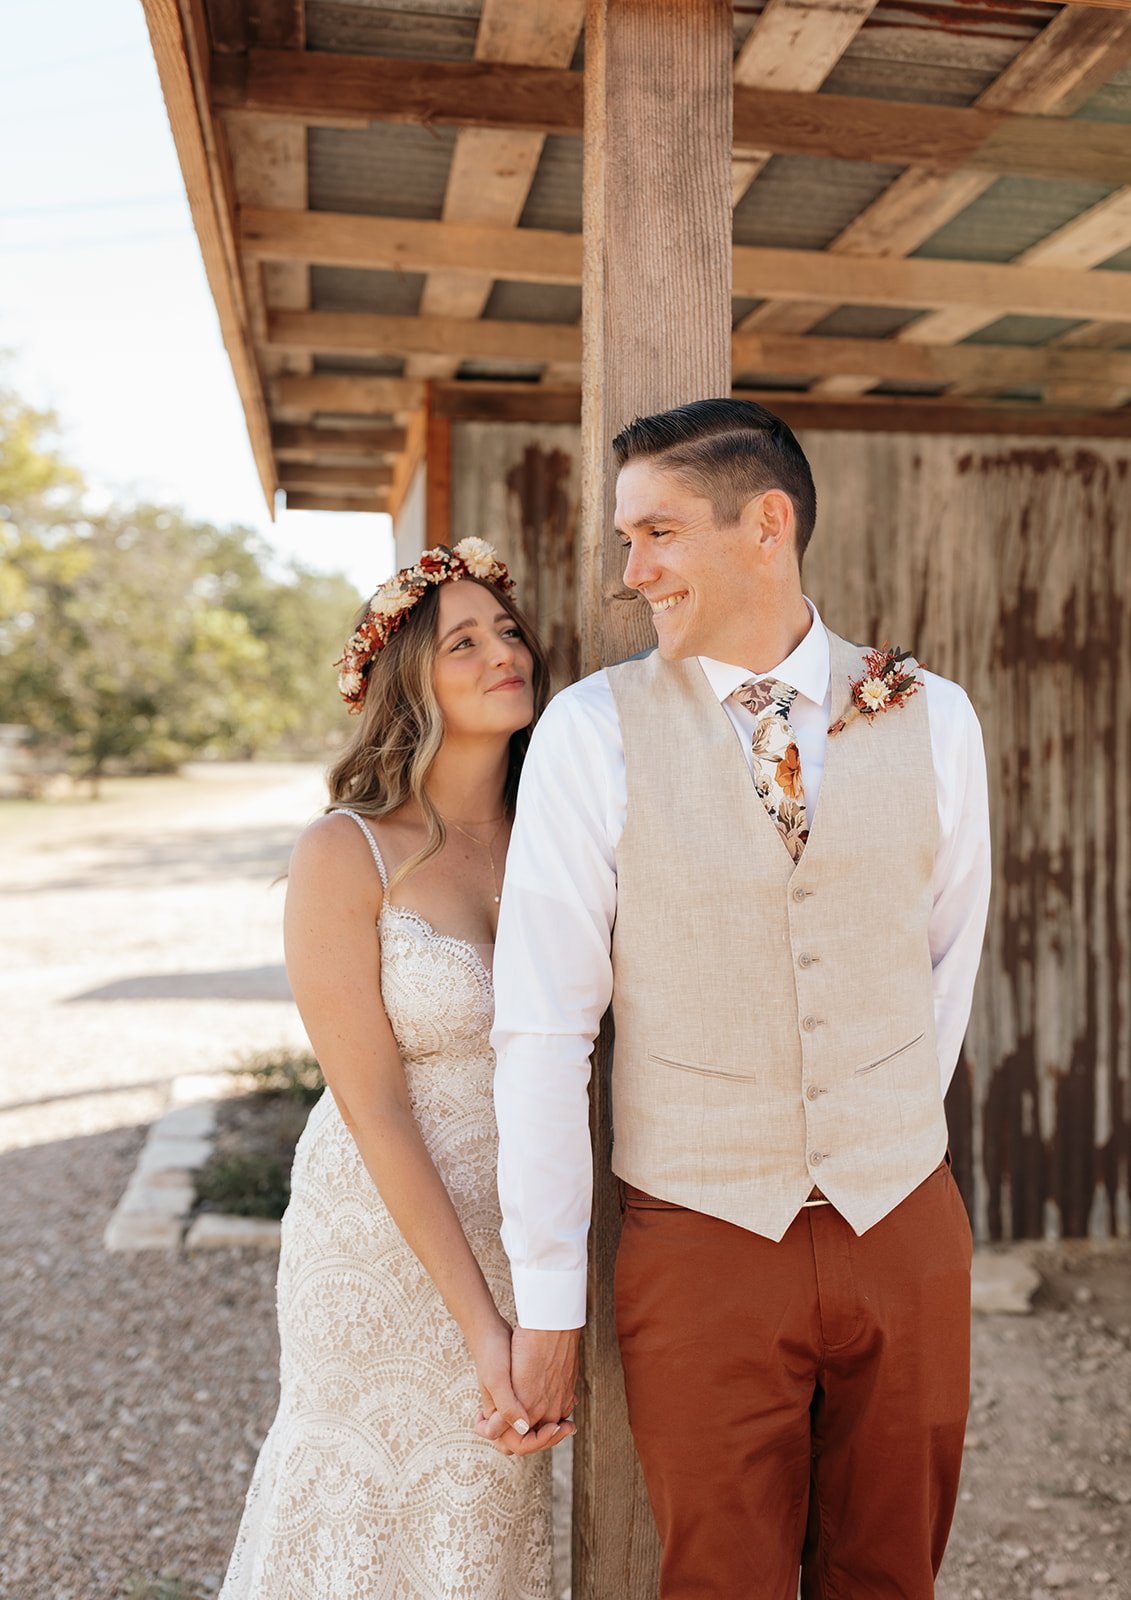 Baron's Creek Camp is an intimate Fredericksburg wedding venue with diverse portrait opportunities